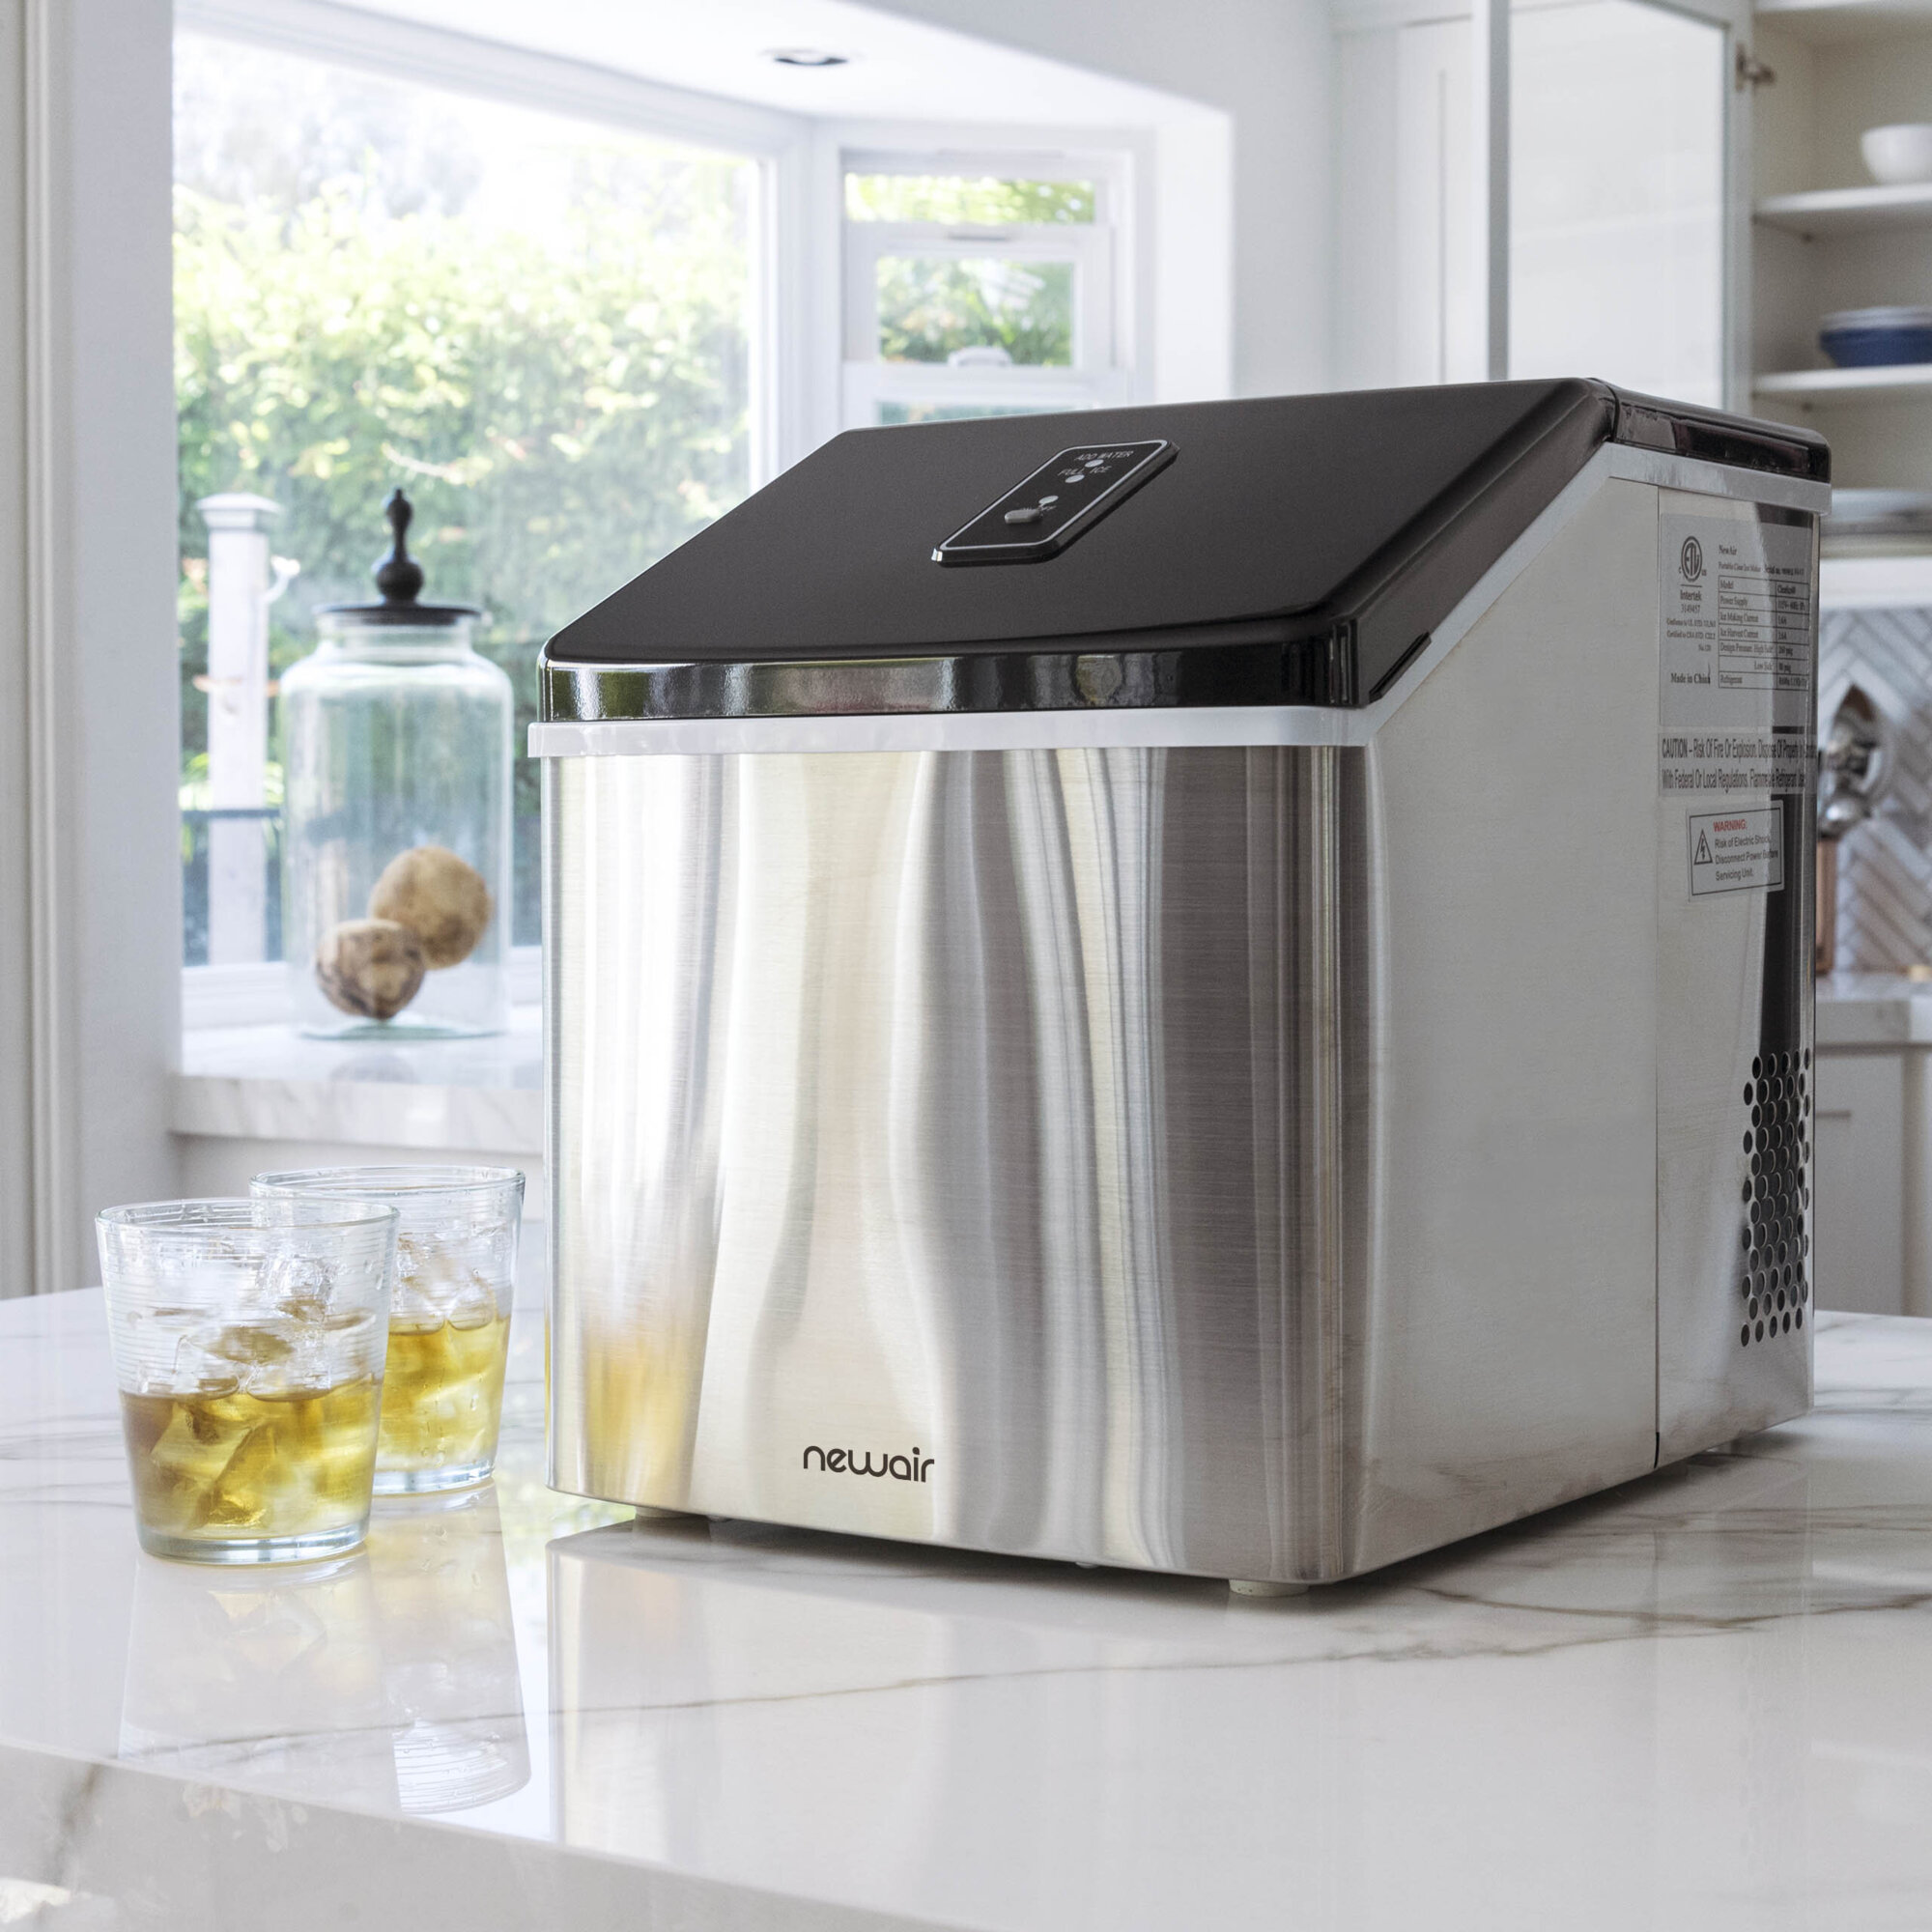 Newair Countertop Nugget Ice Maker, Pieces Per Operating Cycle 9